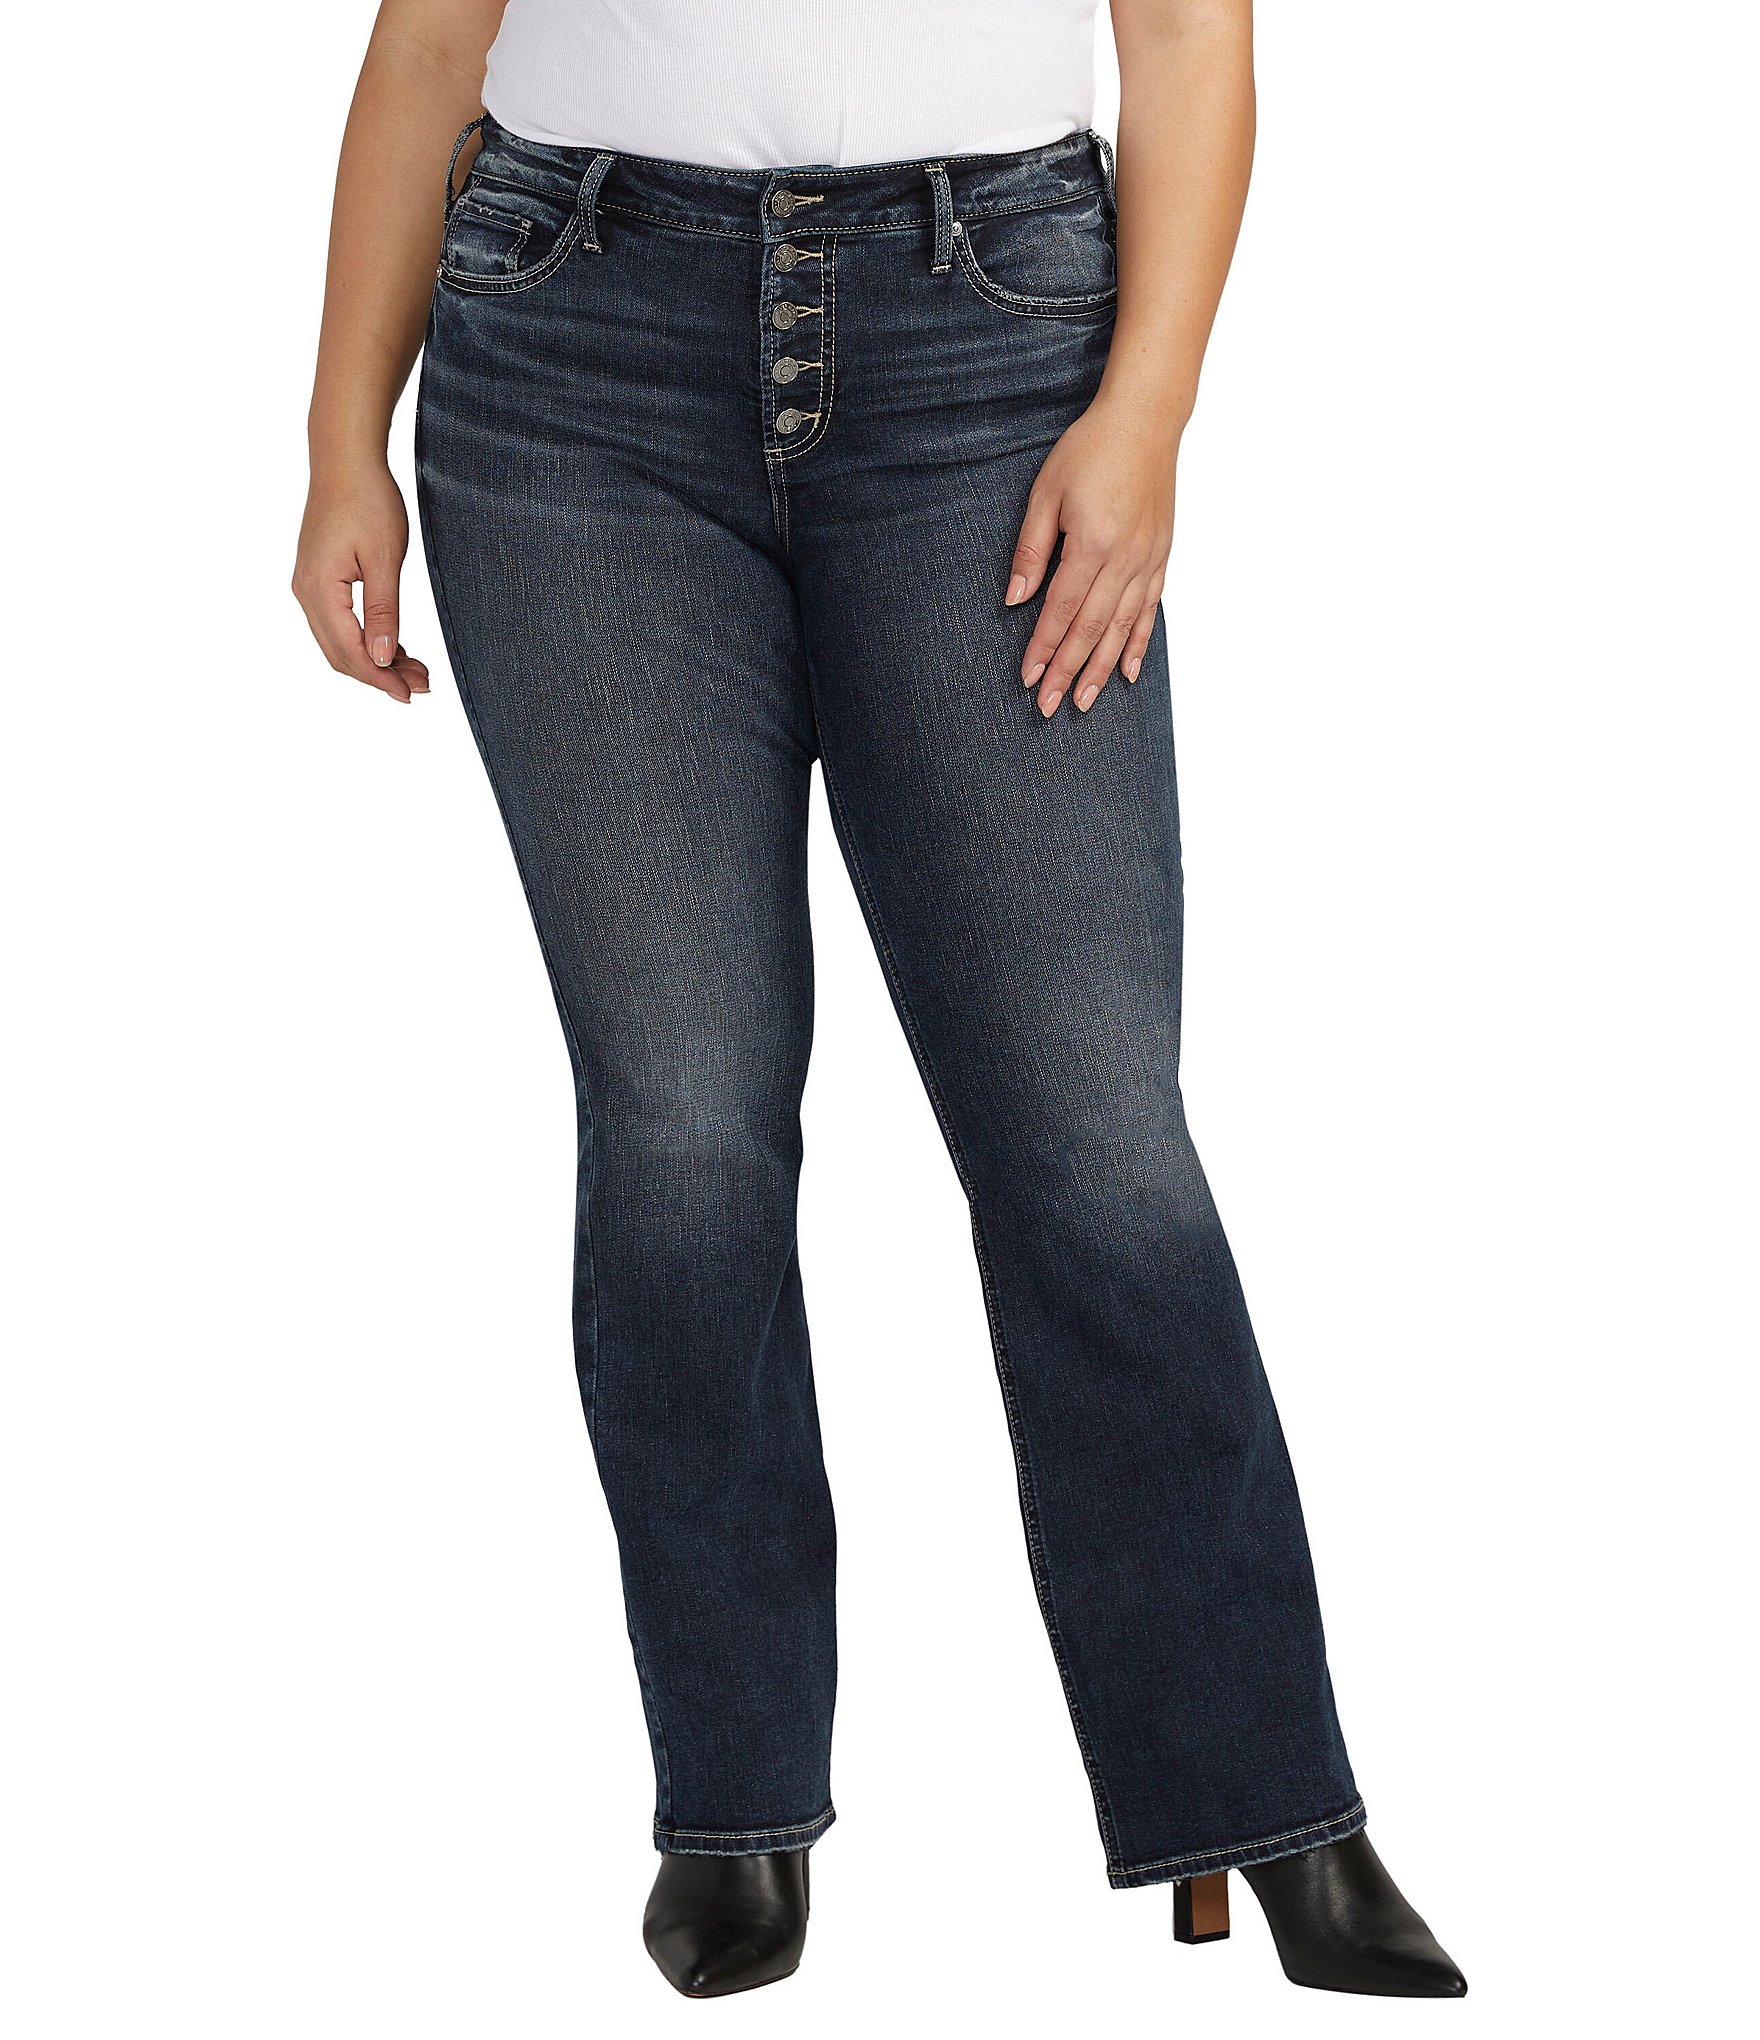 https://dimg.dillards.com/is/image/DillardsZoom/zoom/silver-jeans-co.-plus-size-suki-mid-rise-slim-bootcut-exposed-button-fly-jeans/00000000_zi_d3ae670b-d59c-4138-8ddf-0992abaab442.jpg